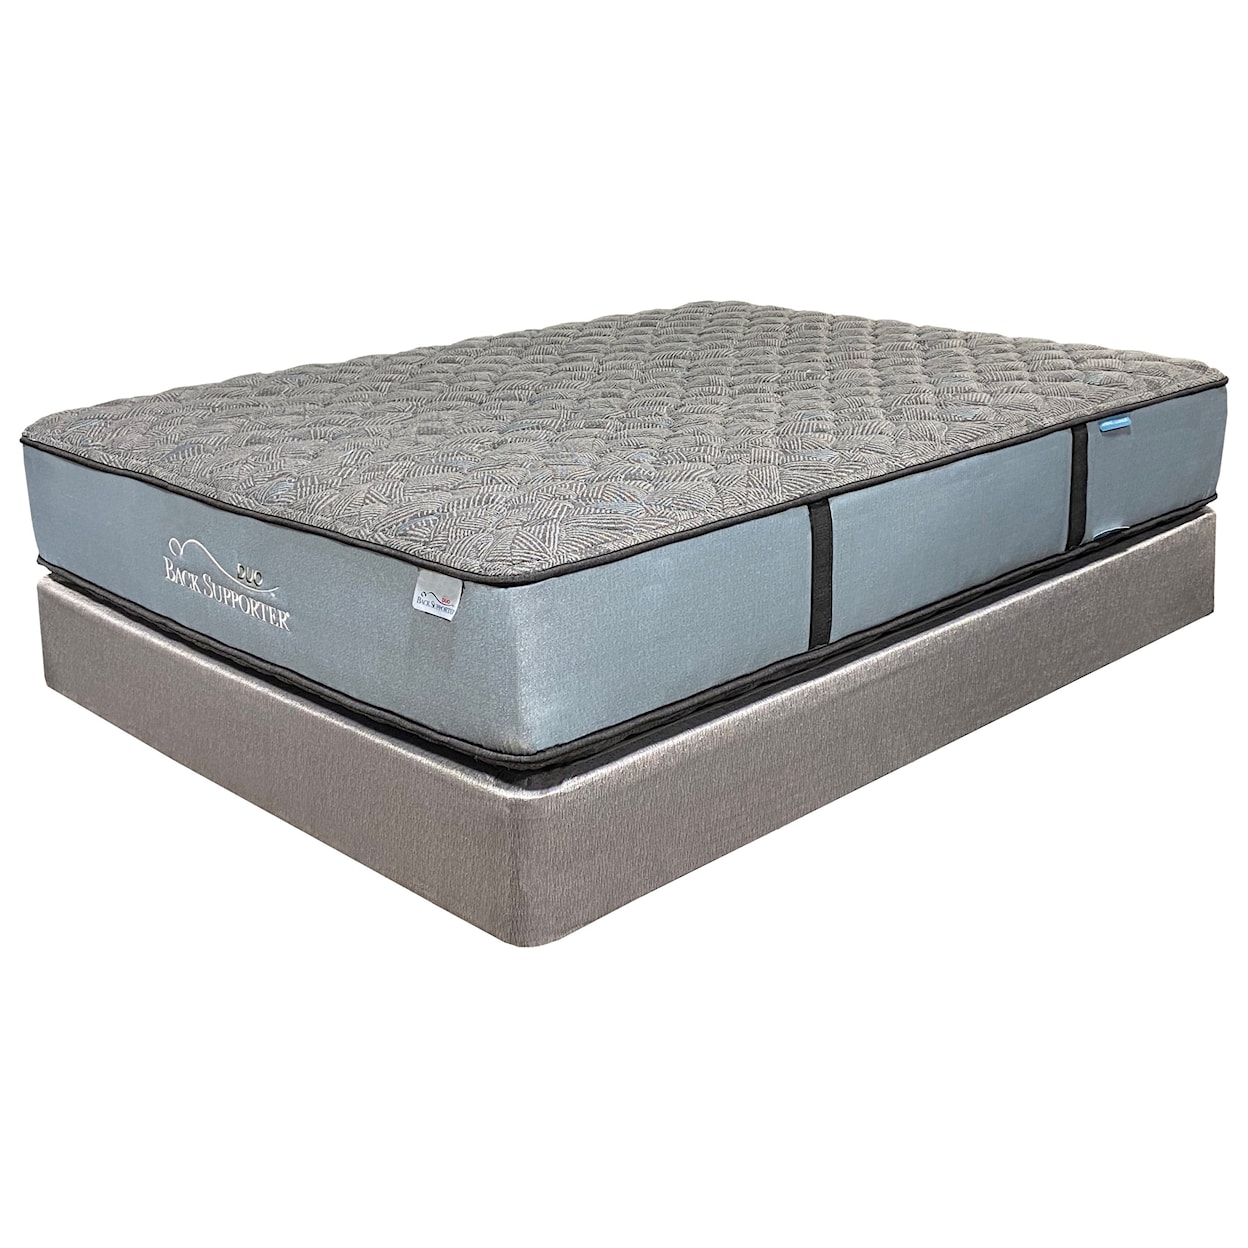 Spring Air All-Seasons Duo Haven Firm King Firm Mattress